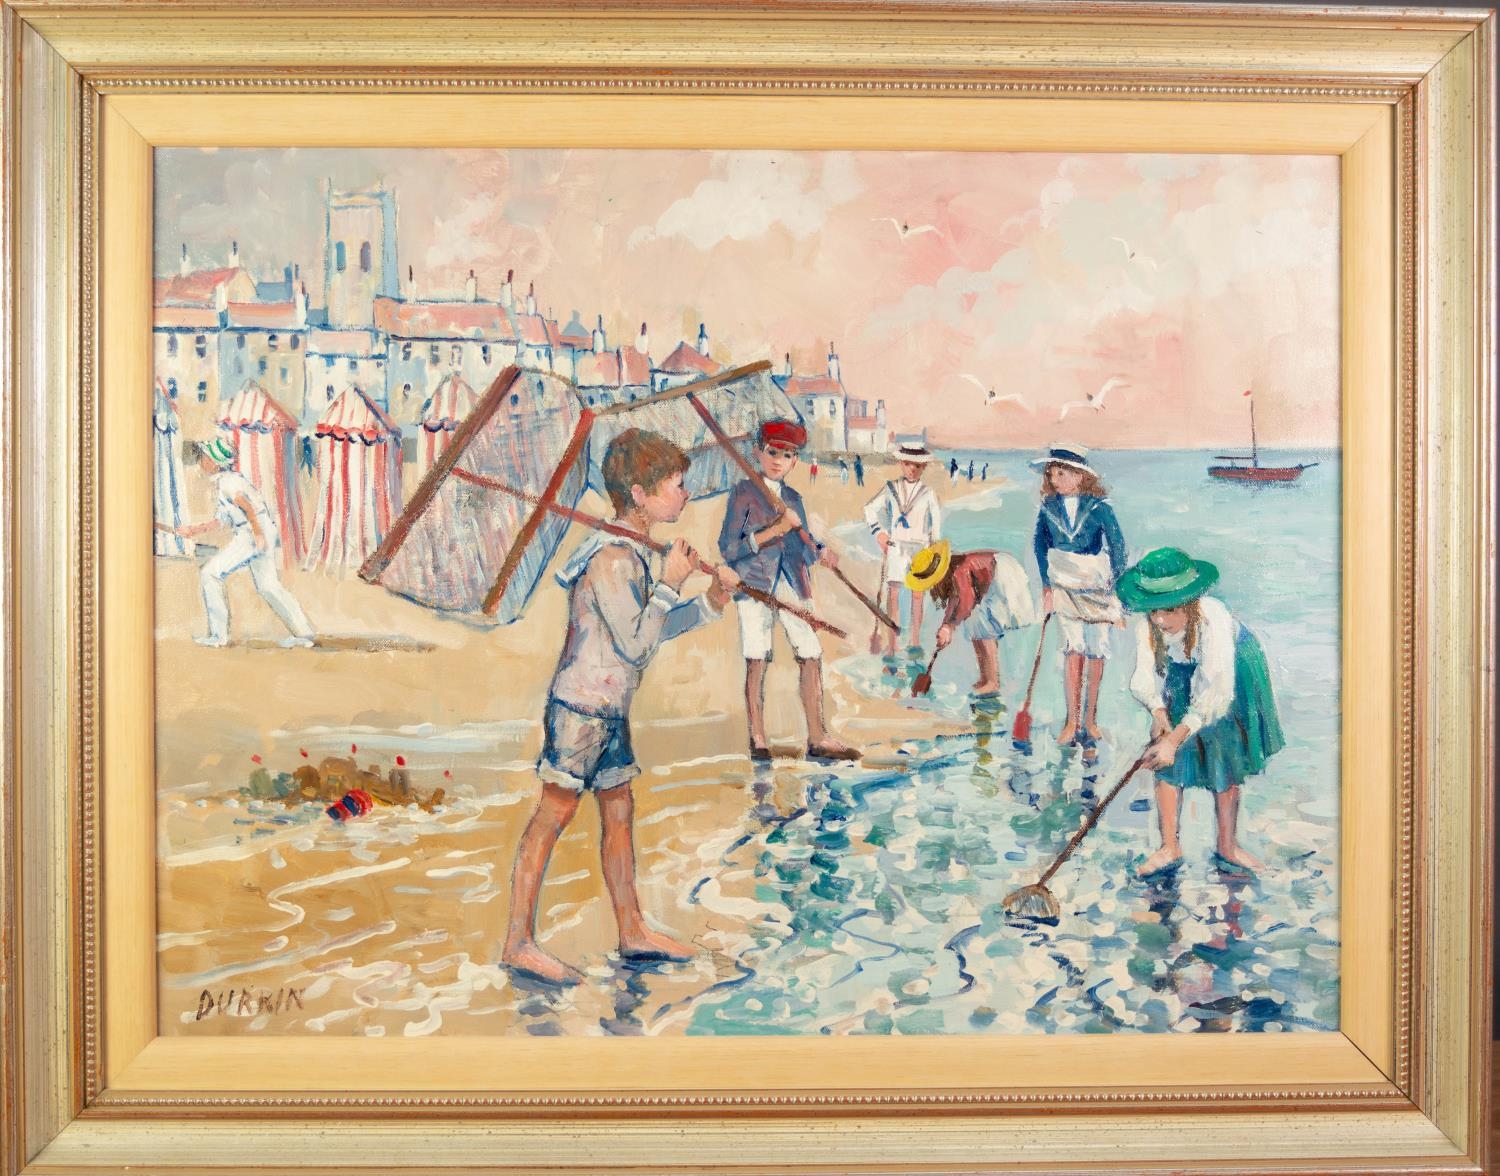 TOM DURKIN (1928-1990) ACRYLIC ON CANVAS Beach scene with children with fishing and shrimping nets - Image 2 of 2